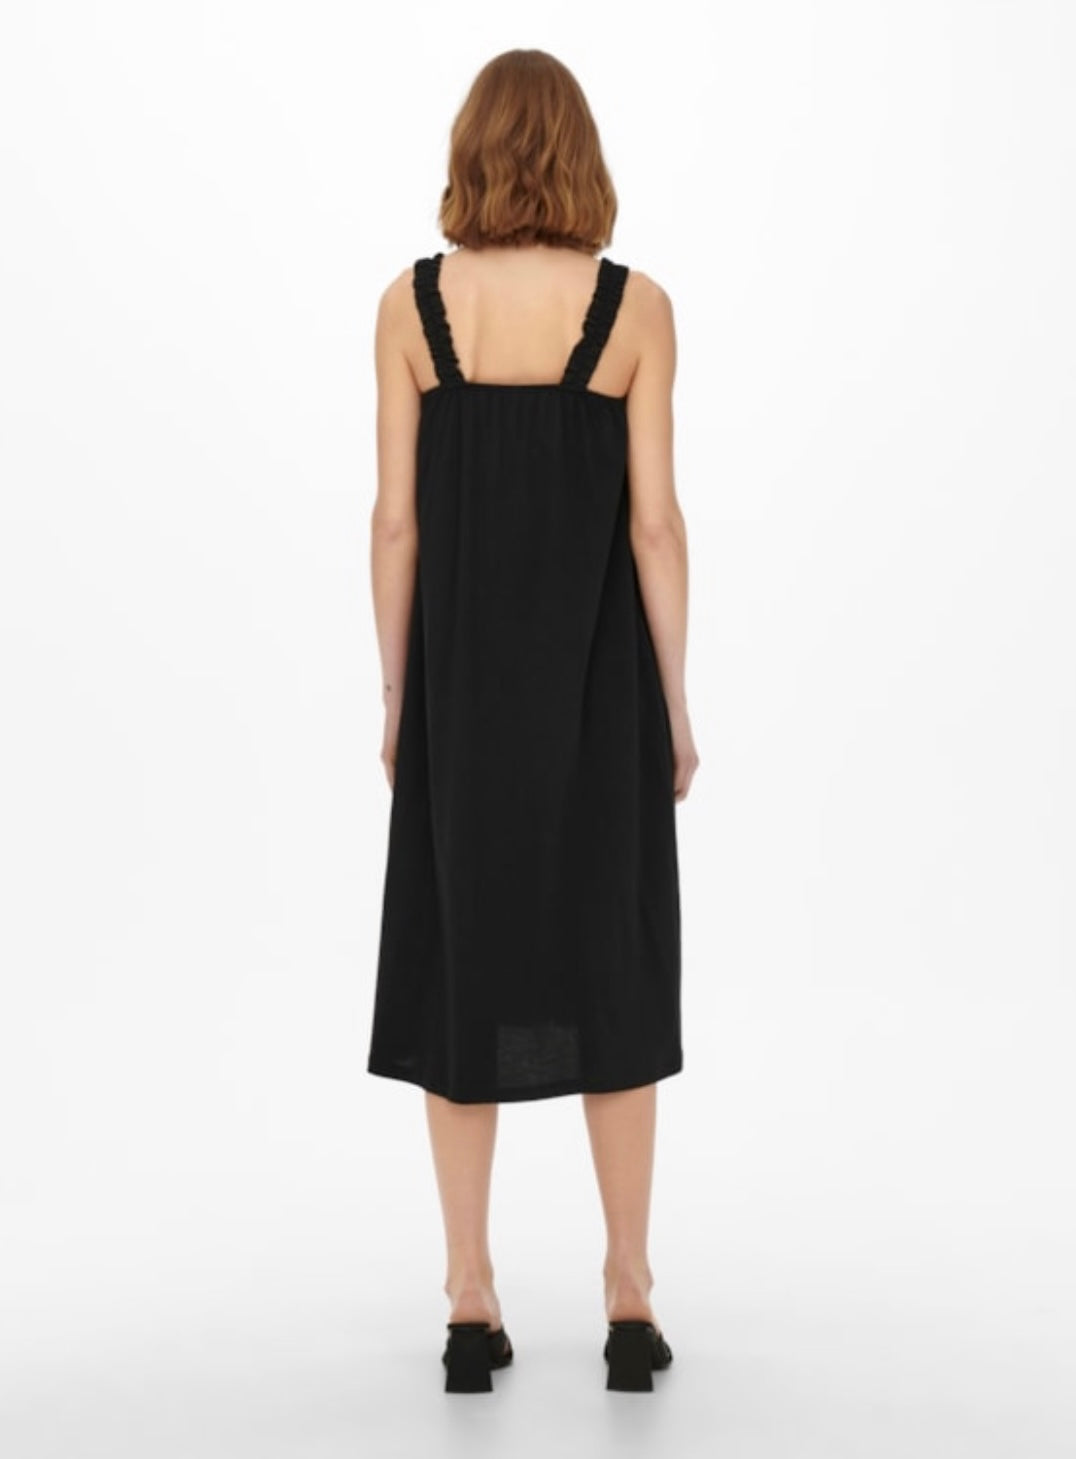 ONLY - MAY S/L MIX DRESS - BLACK